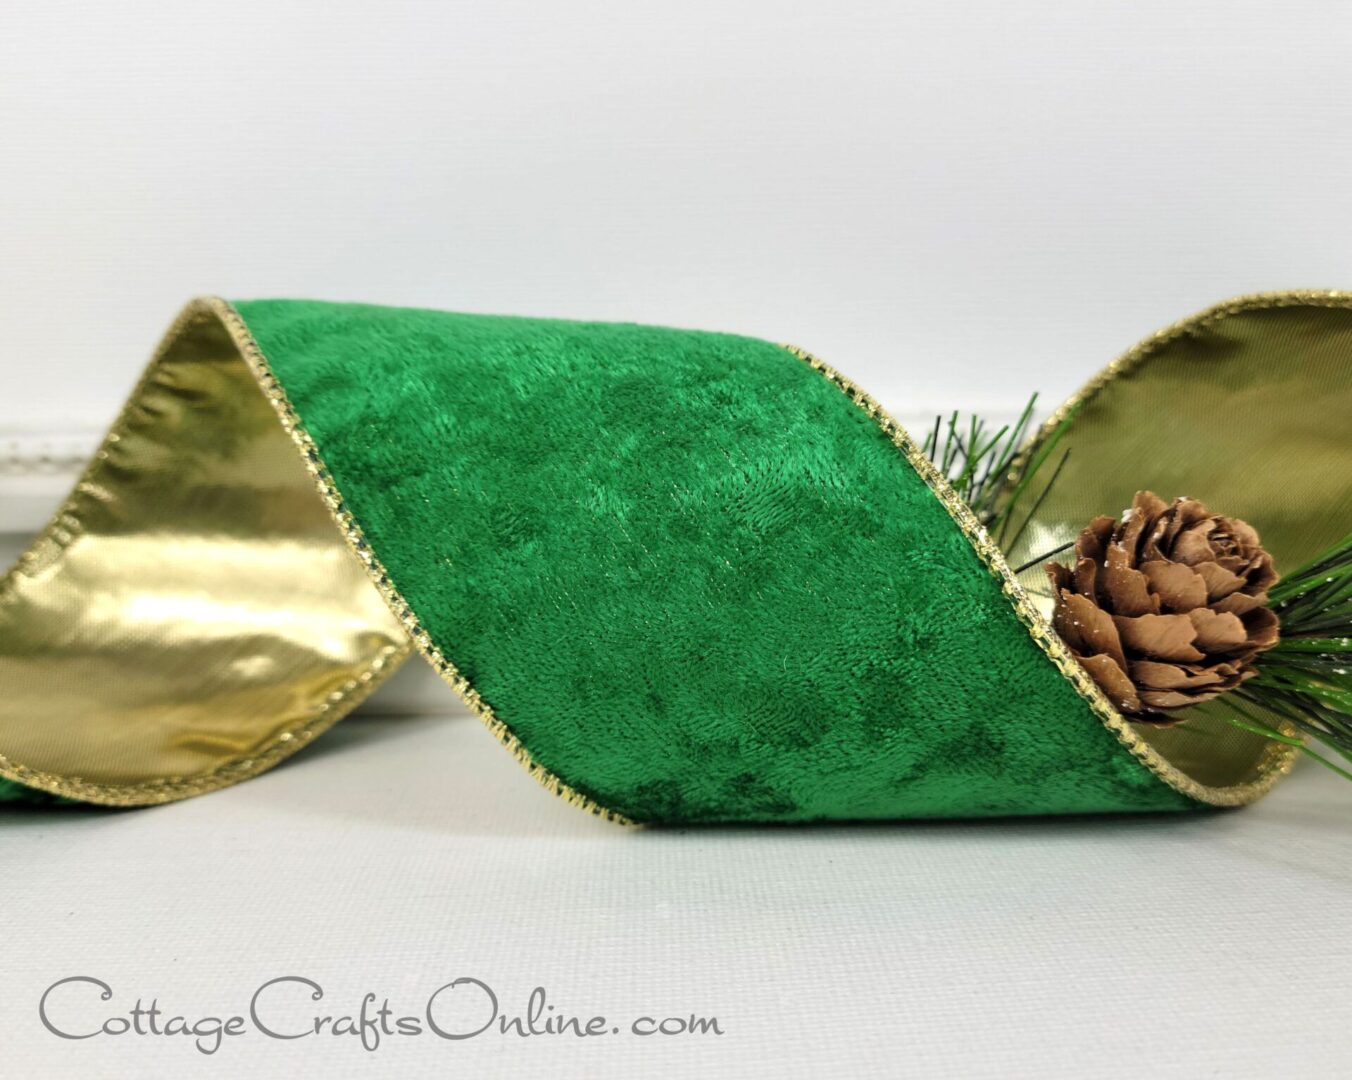 Emerald green velvet with gold back 2.5" wide wired ribbon from the Etsy shop of Cottage Crafts Online.